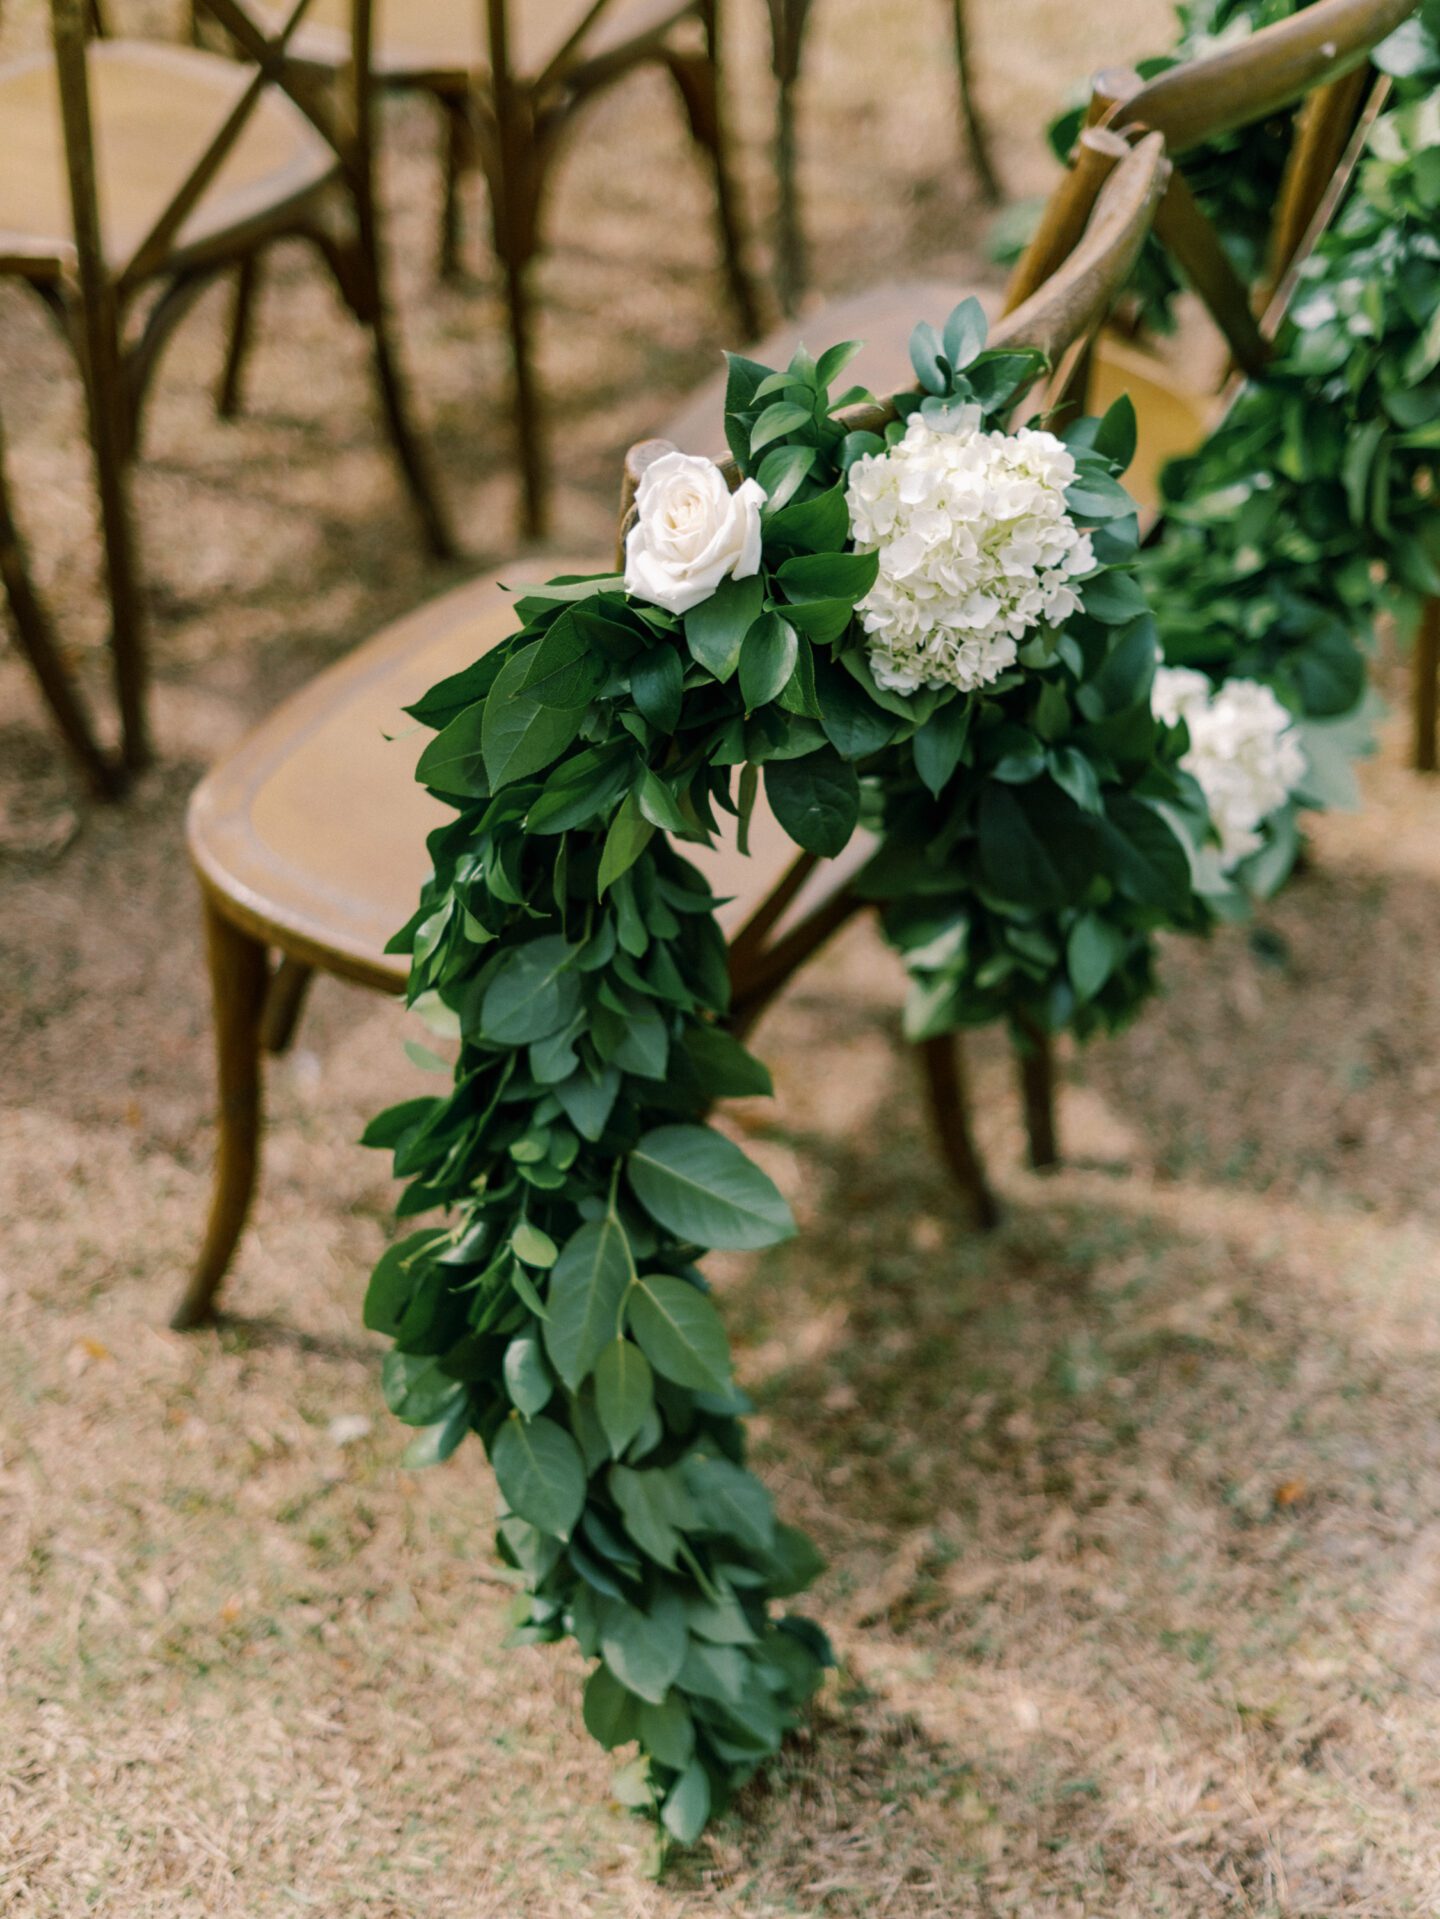 An outdoor ceremony with greenery and white flowers.